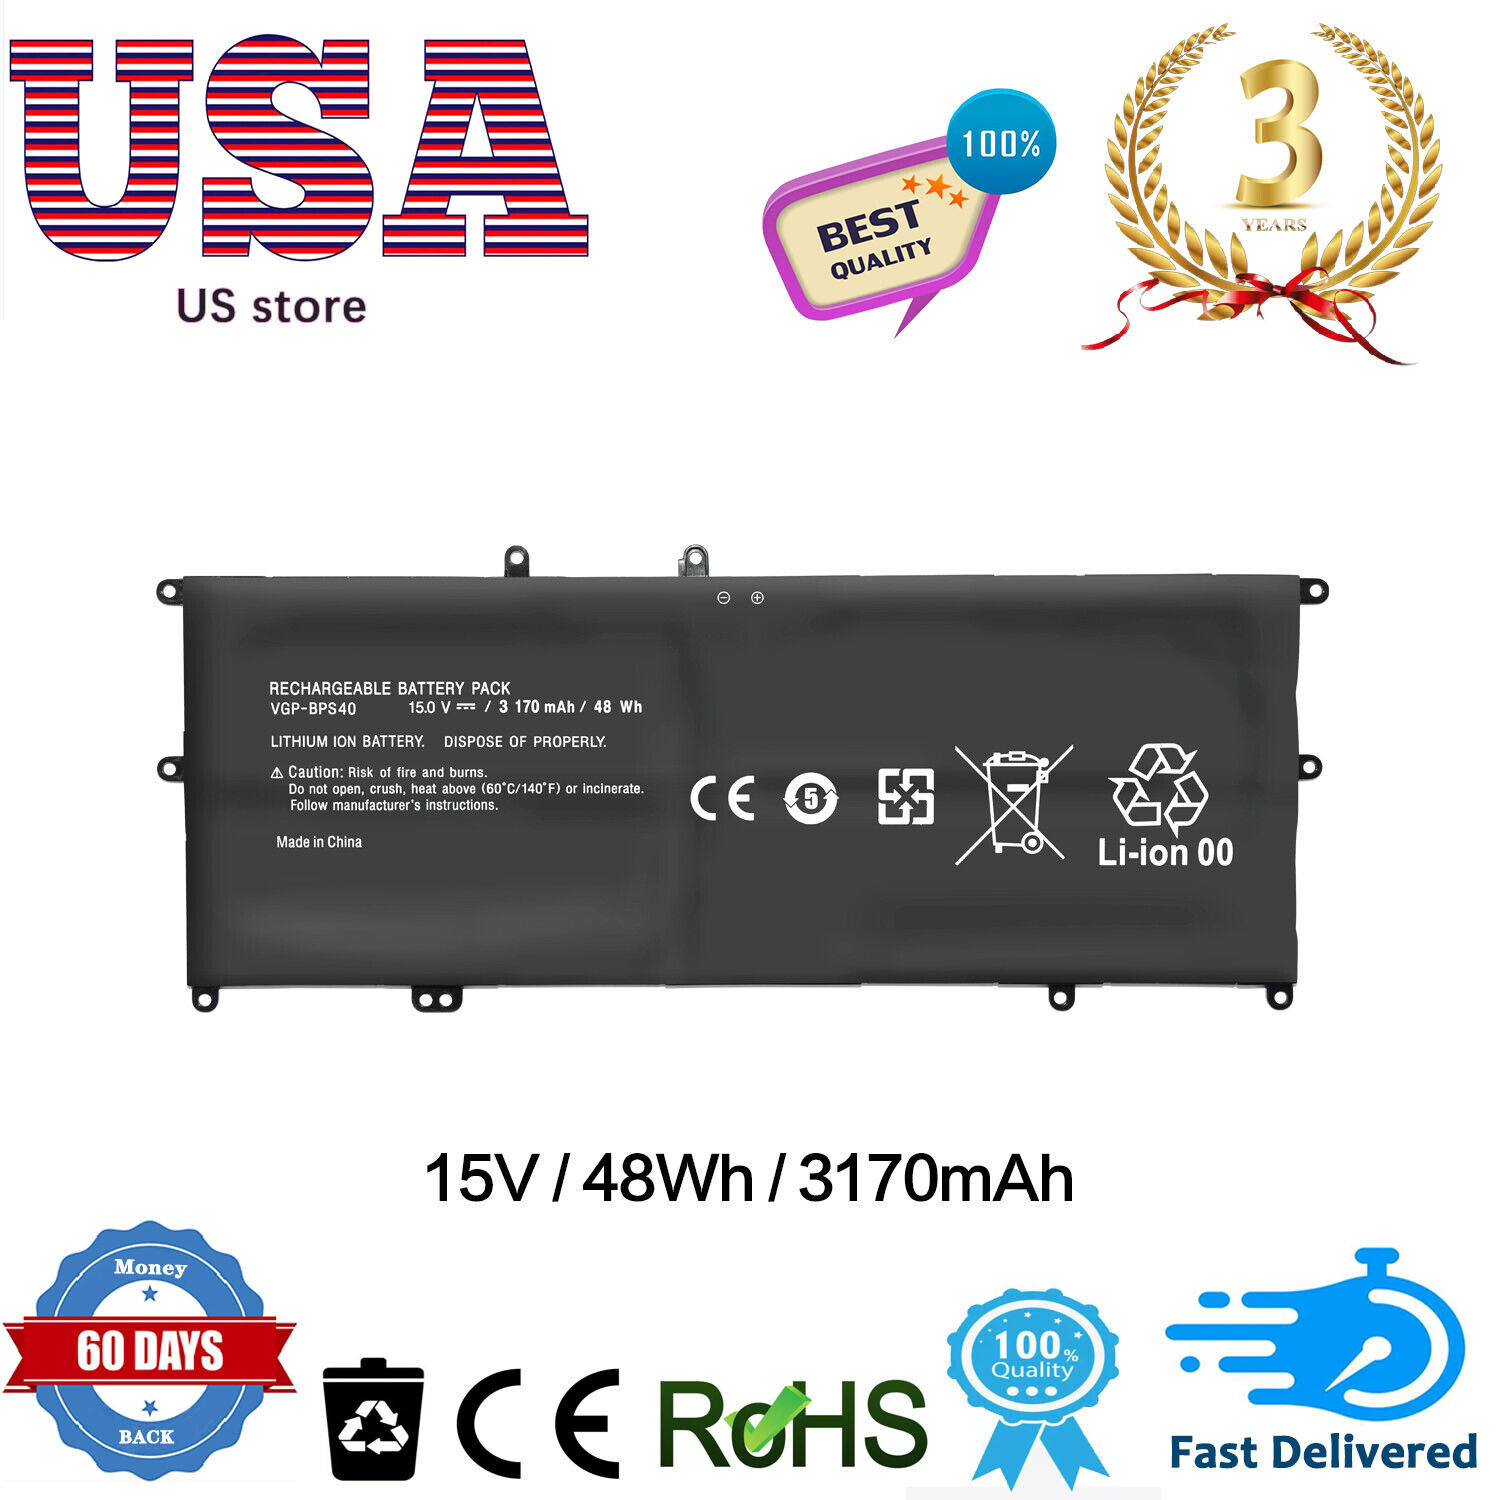 Rechargeable Battery Pack 15V 48Wh for Sony Vaio Flip SVF 14A 15A VGP-BPS40 FAST